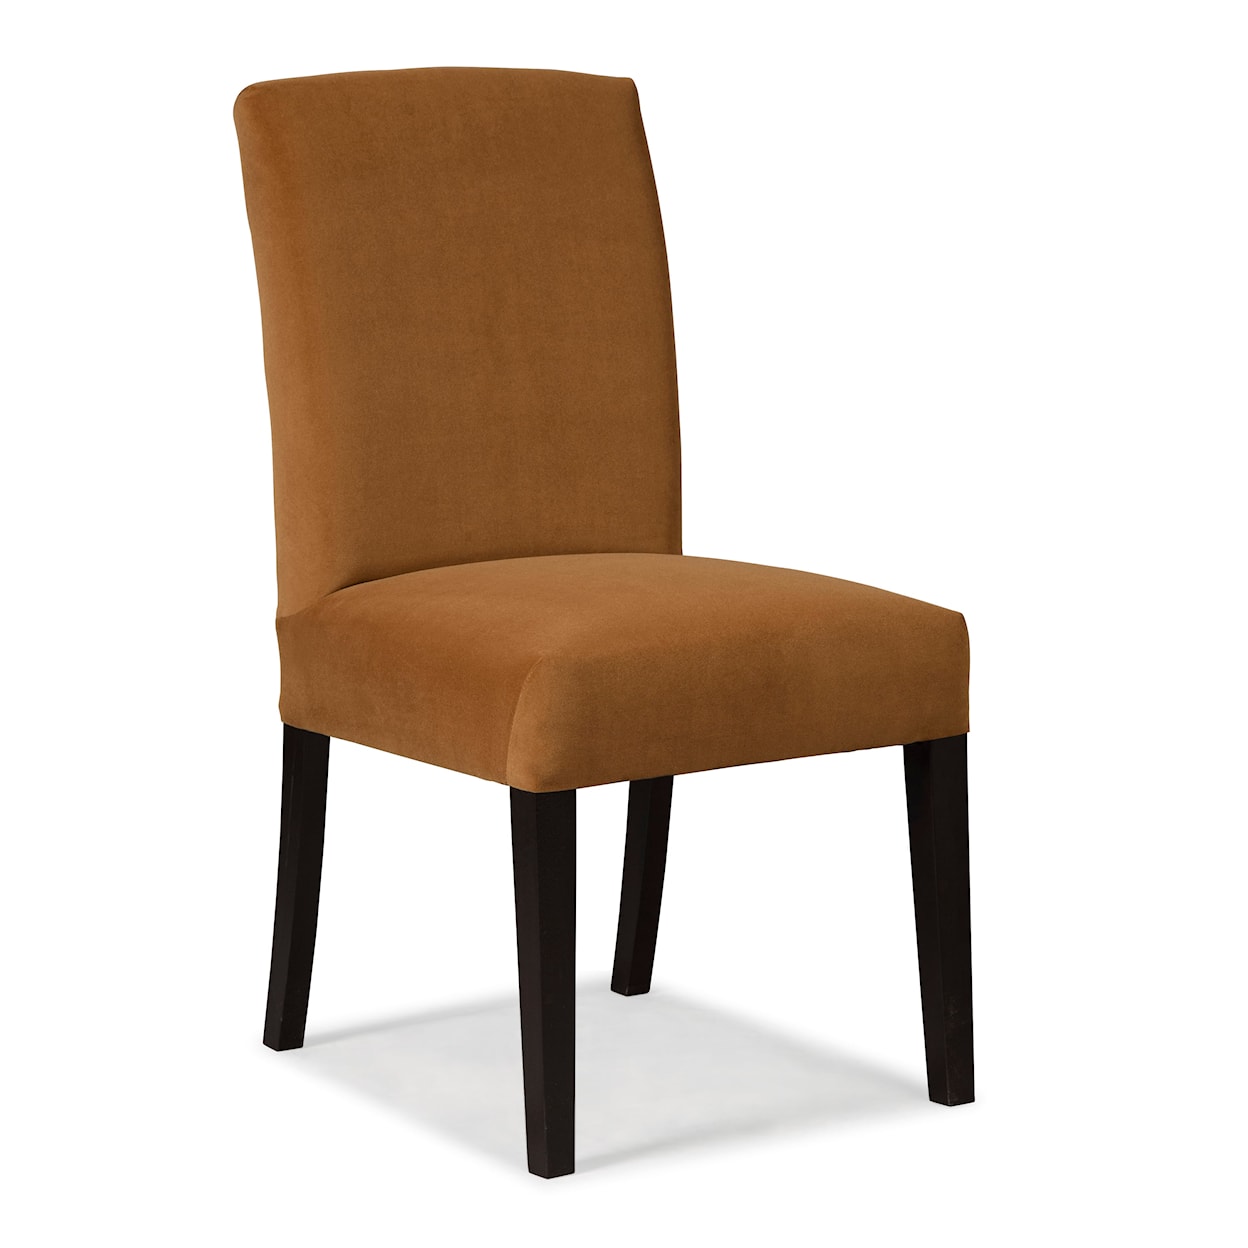 Bravo Furniture Myer Upholstered Dining Chair